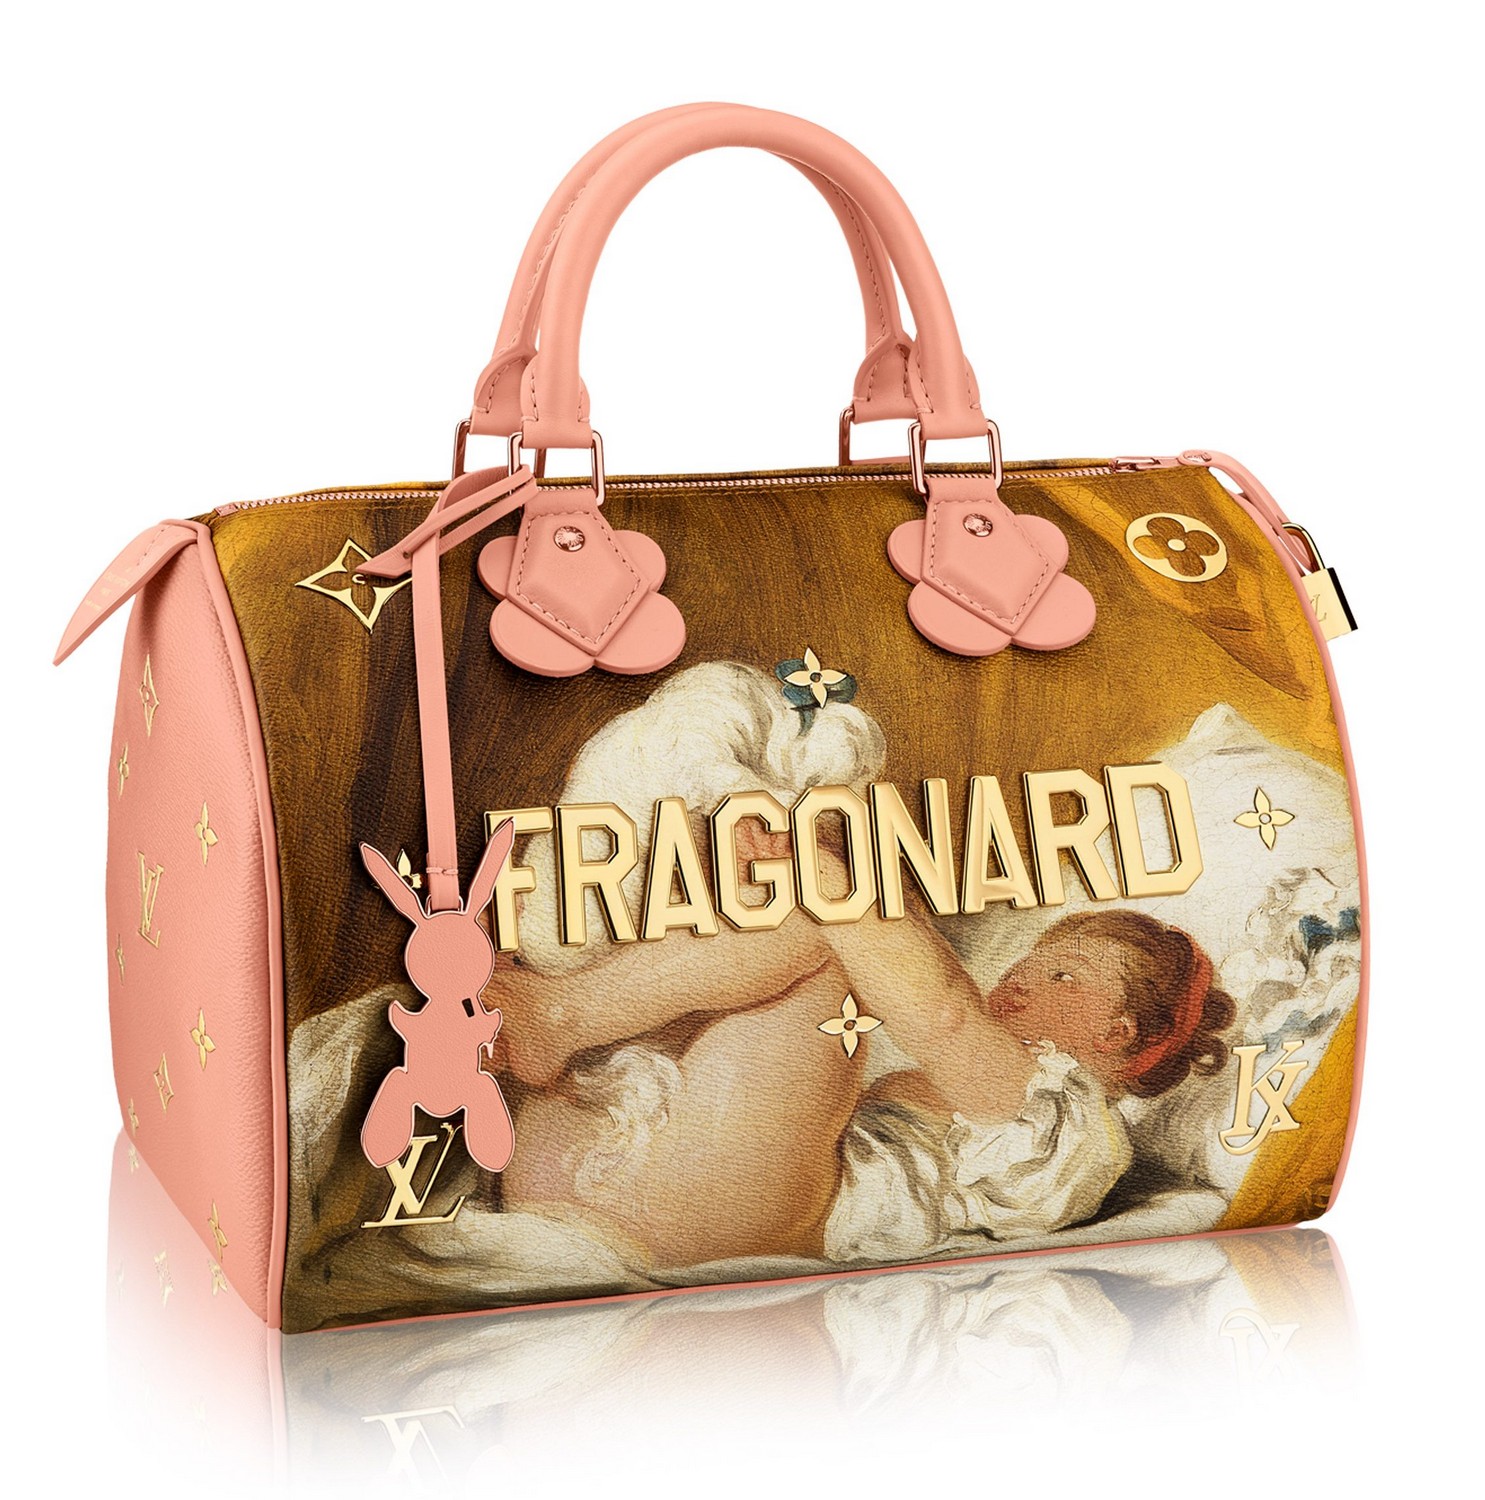 Louis Vuitton and artist Jeff Koons take on the masterpieces in collaborative bag collection